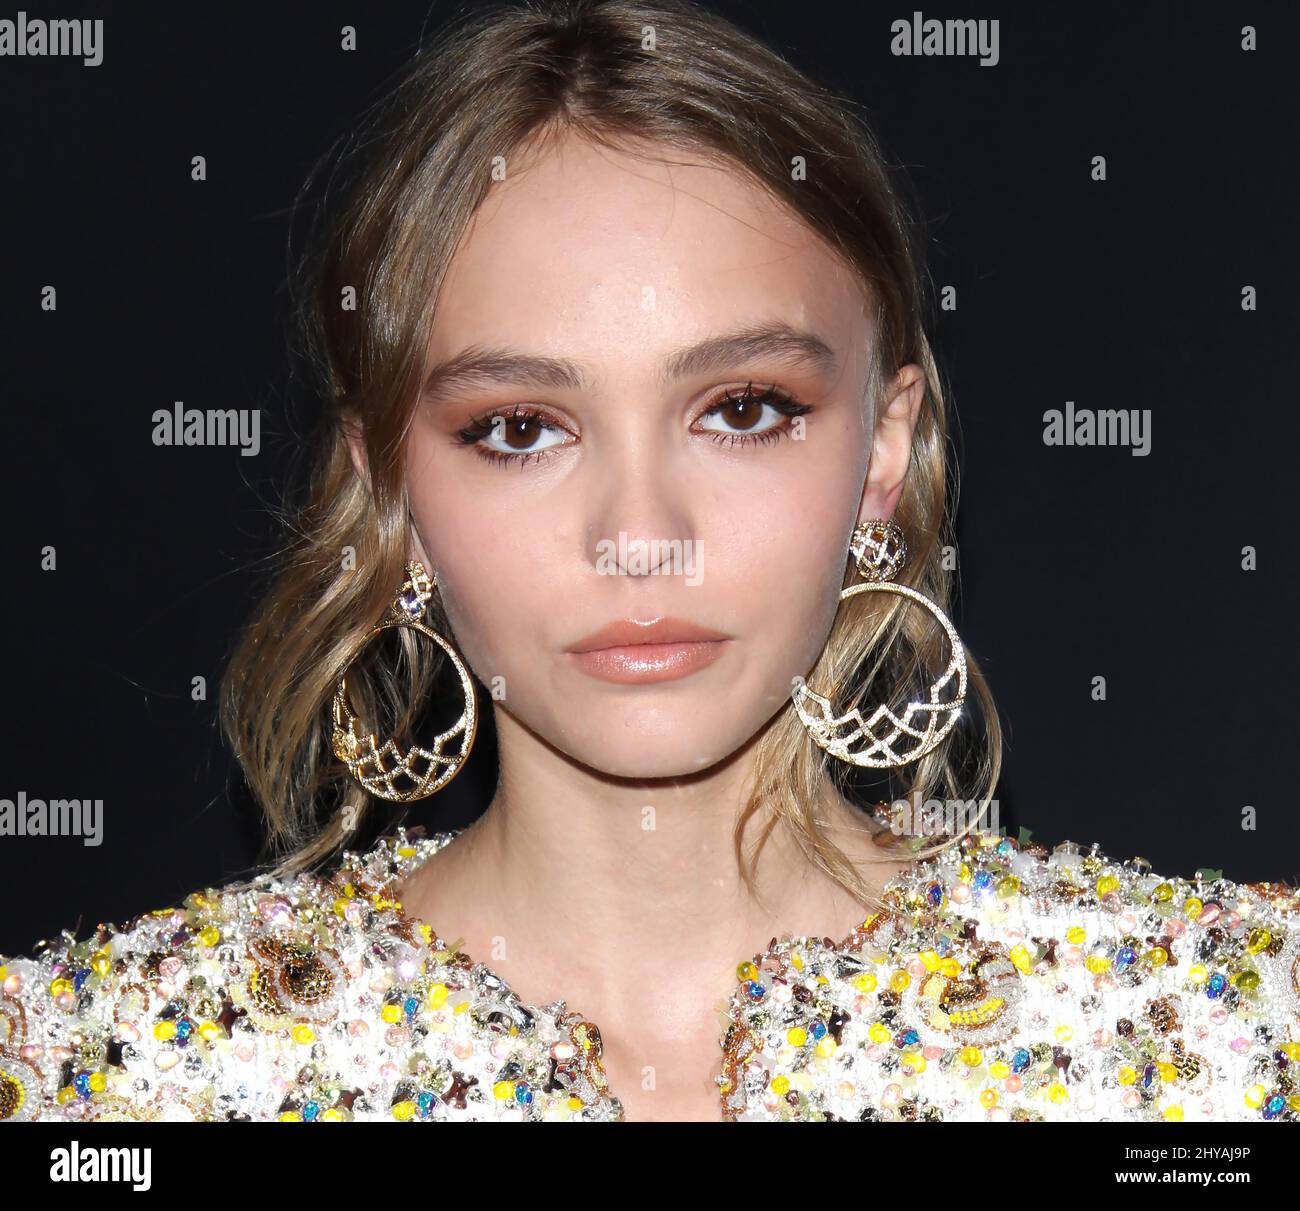 Lily-Rose Depp's Chanel Cat Eye for the Met Gala 2017